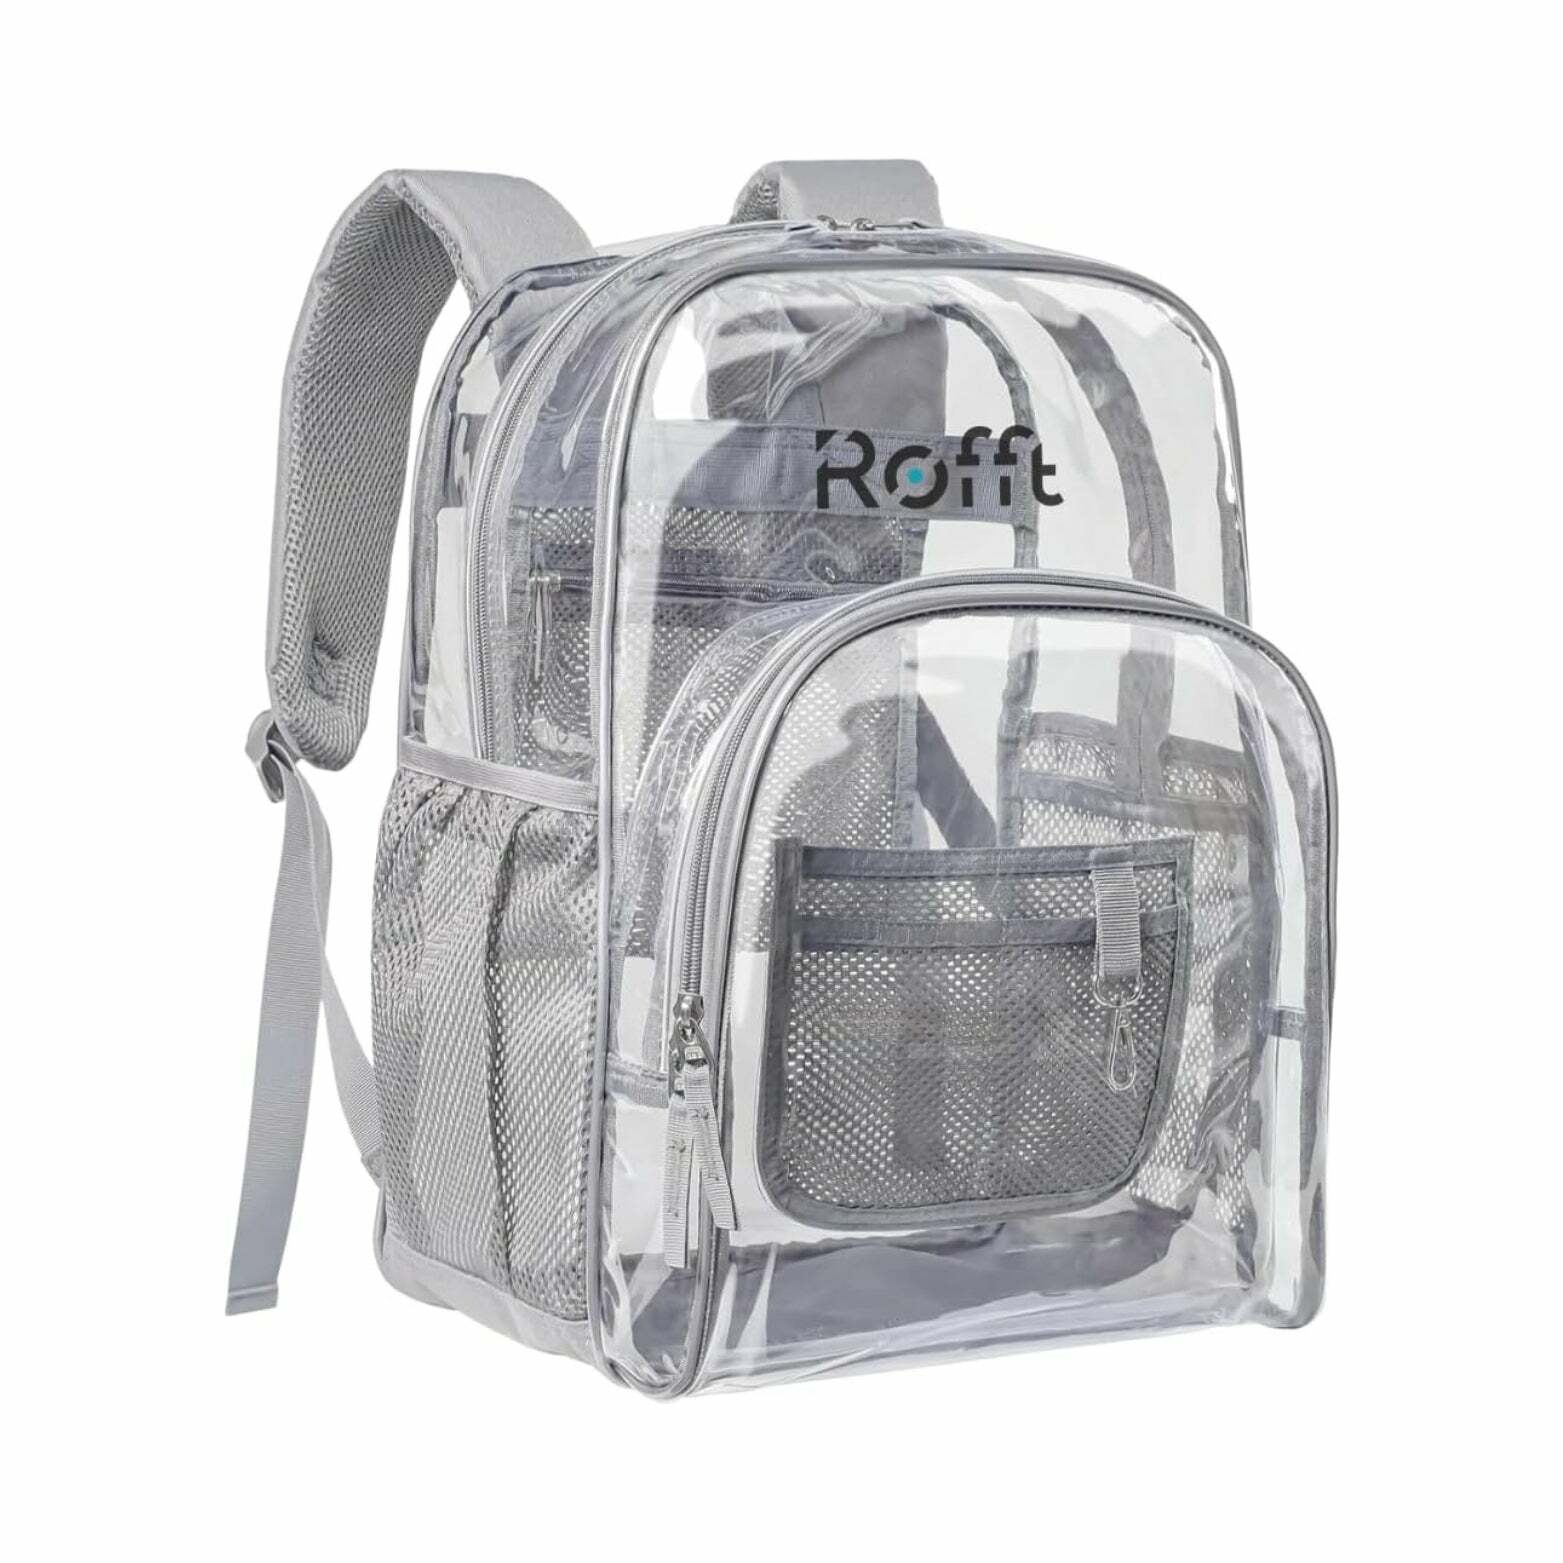 ROFFT Large Clear Backpack - Durable PVC with Reinforced Straps and Multiple Pockets, Gray